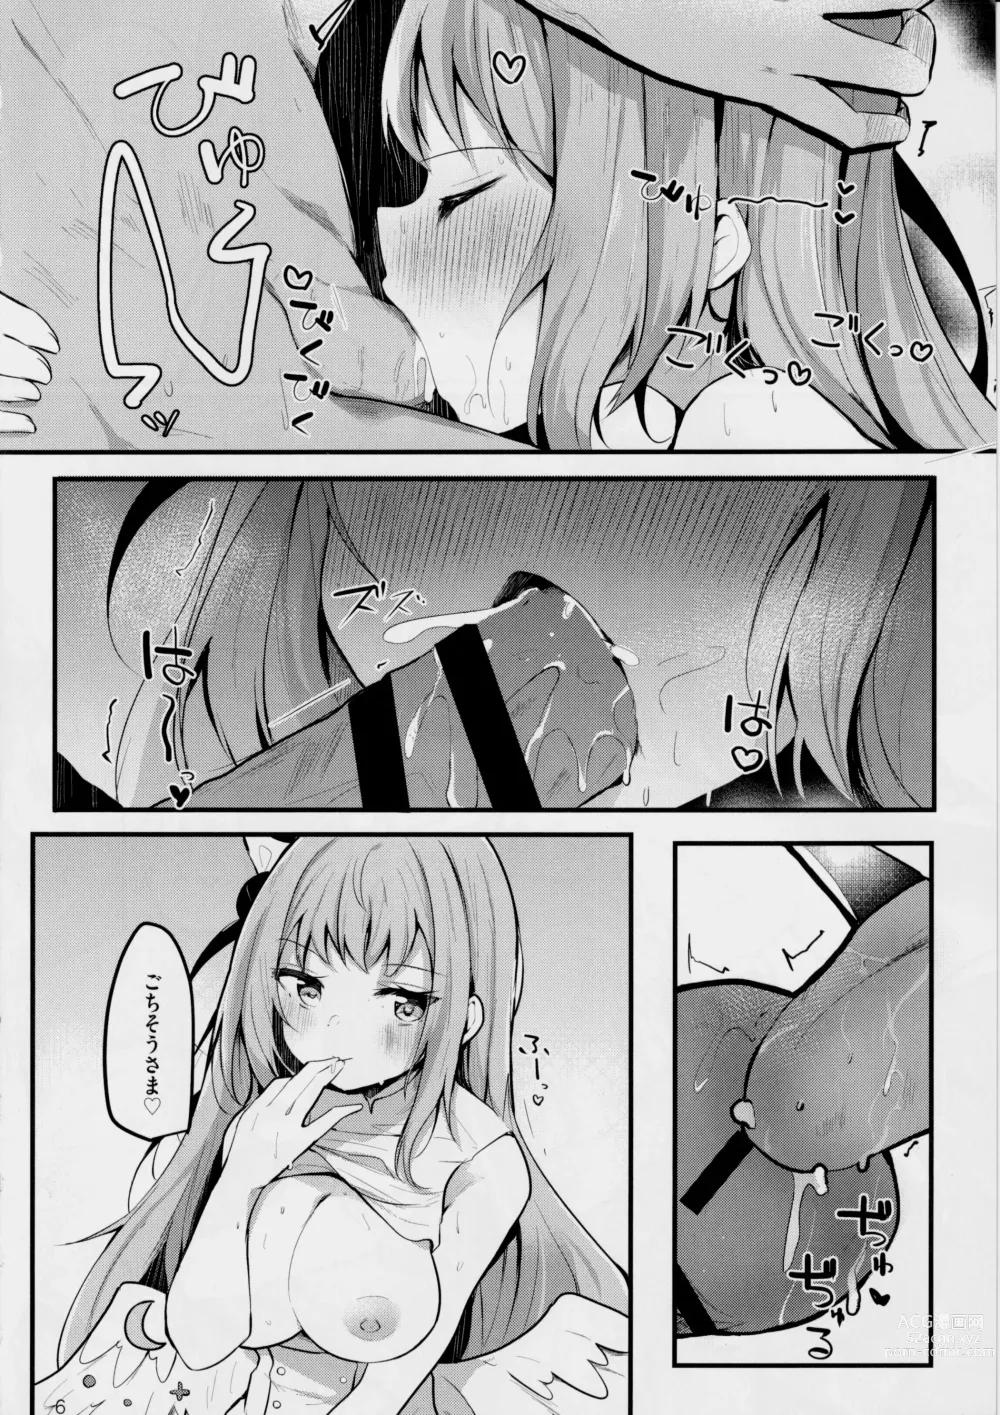 Page 7 of doujinshi Mika no Yuuwaku Tanetsu Ecchi - She seduces her loving teacher and gets him to have sex with her inside.